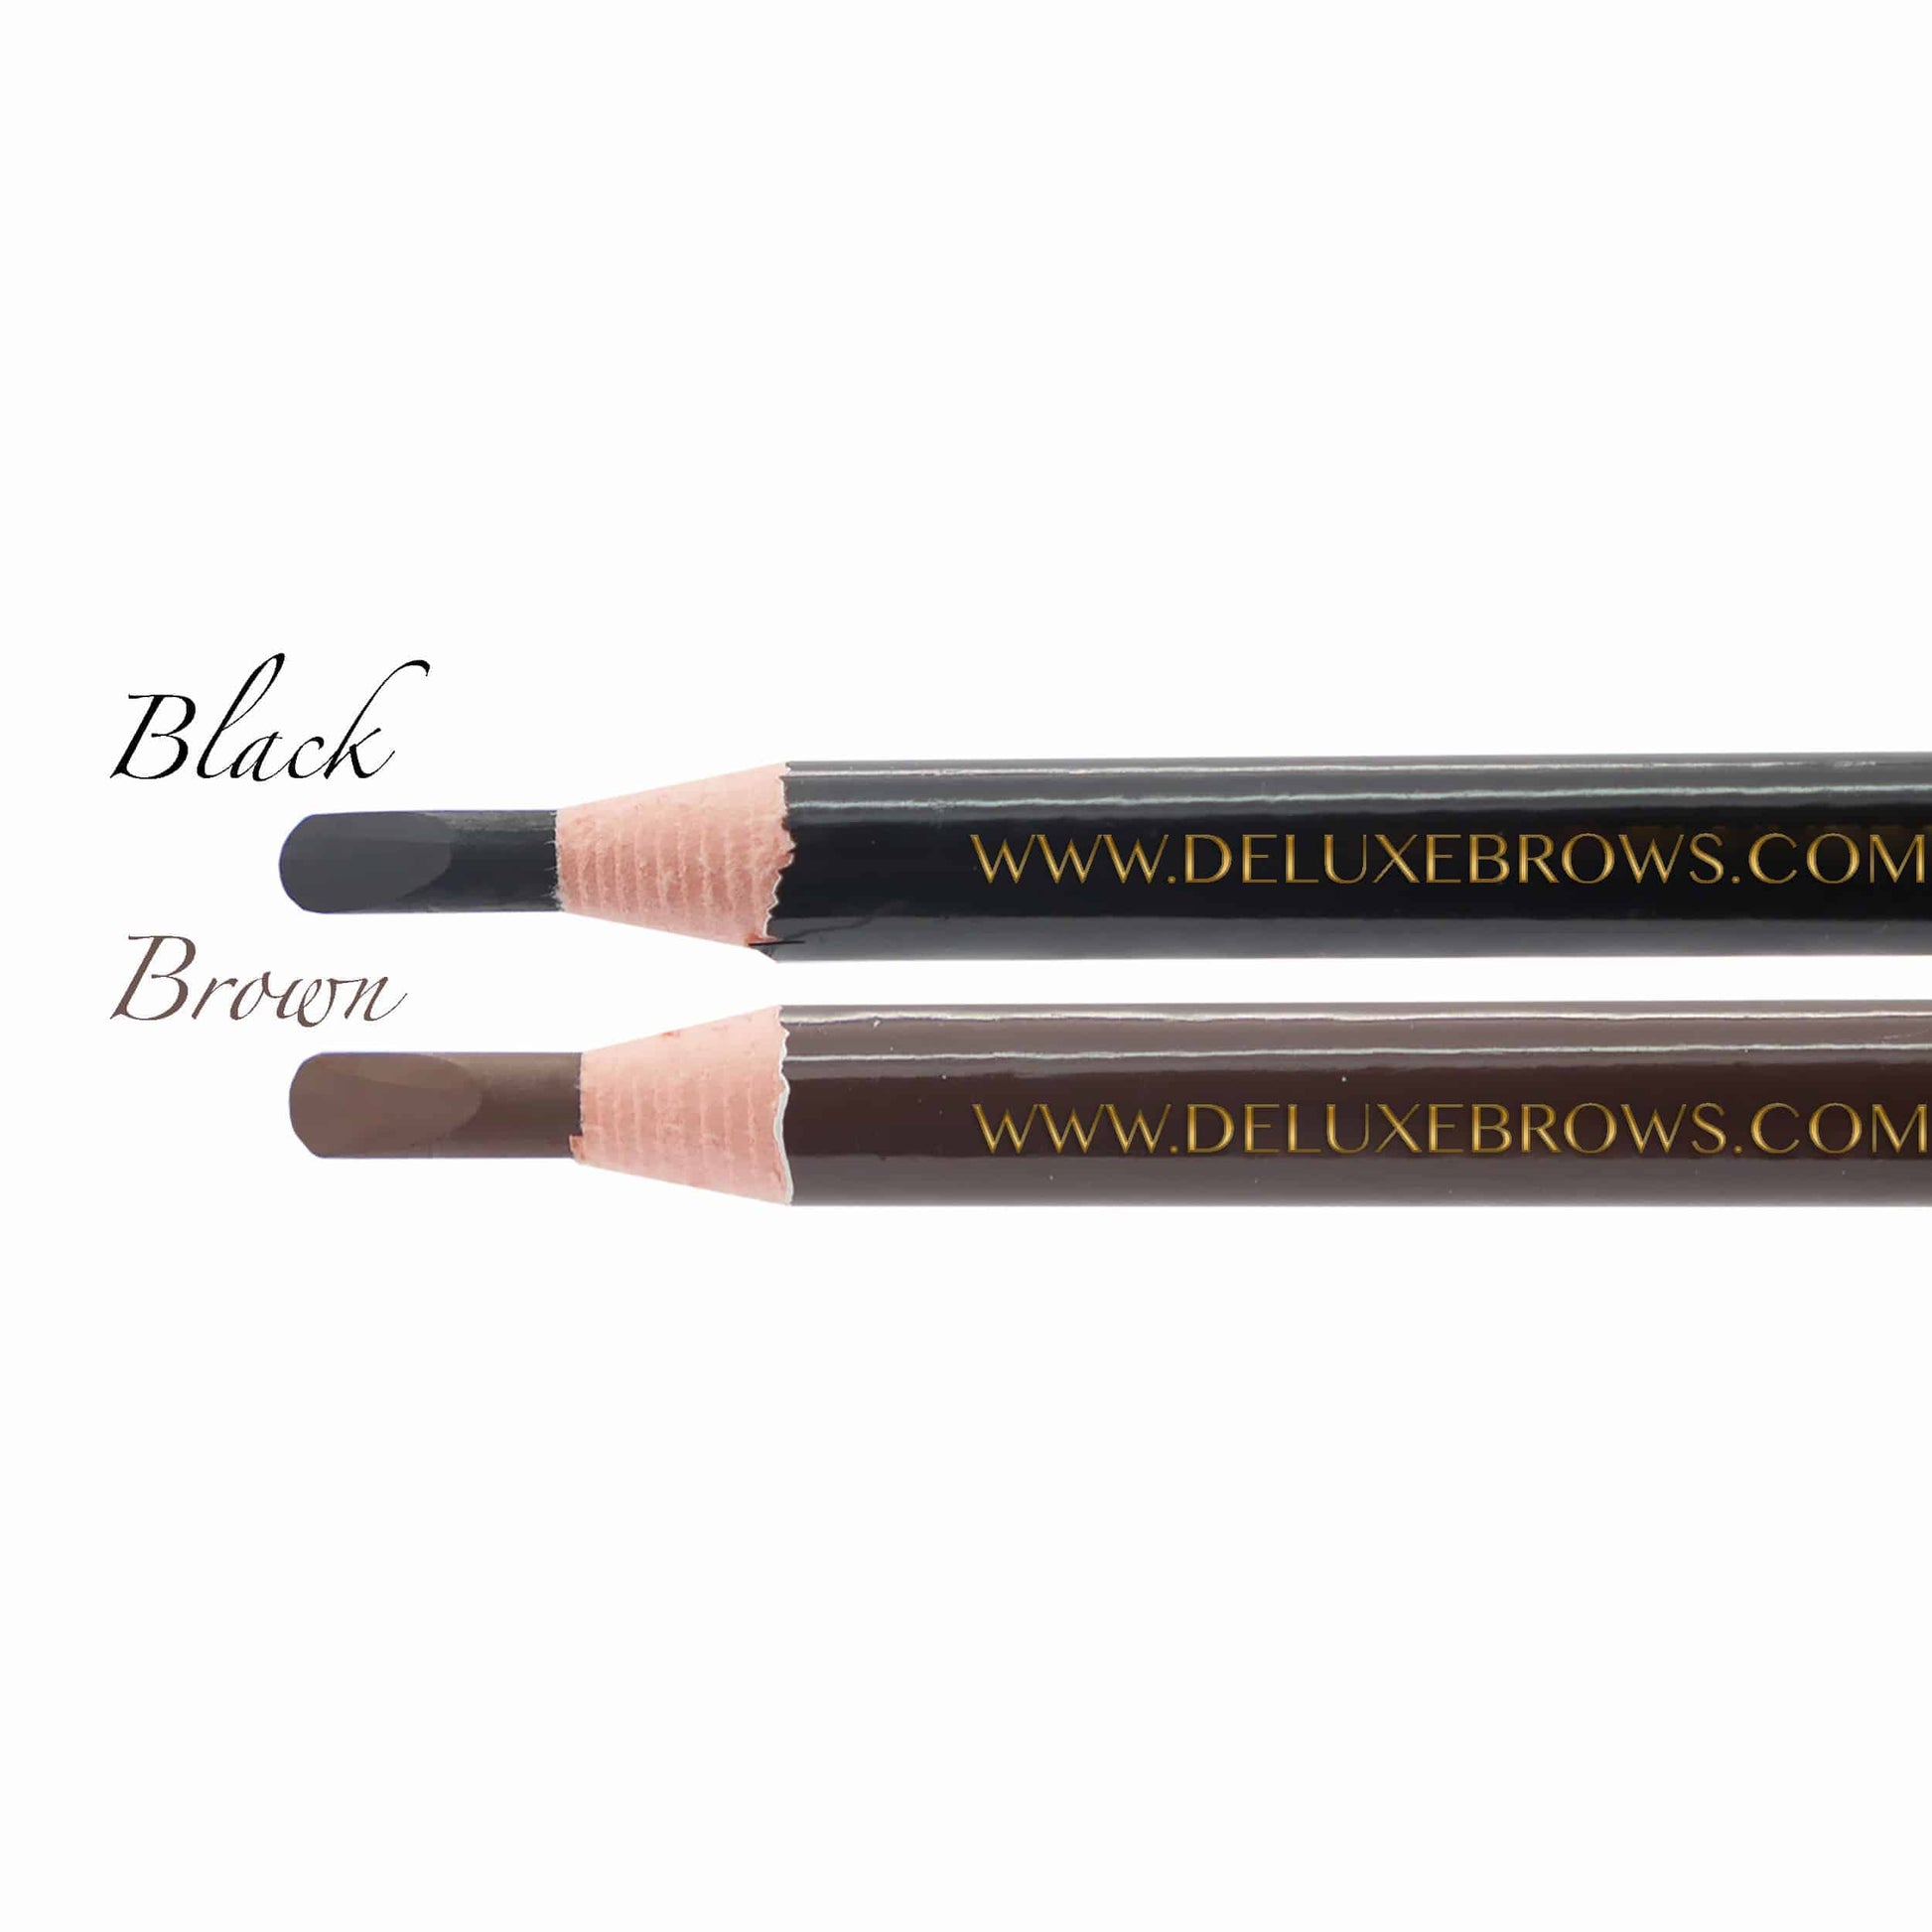 4 x Deluxe Brows® Hard Brow Brow Mapping Pencils